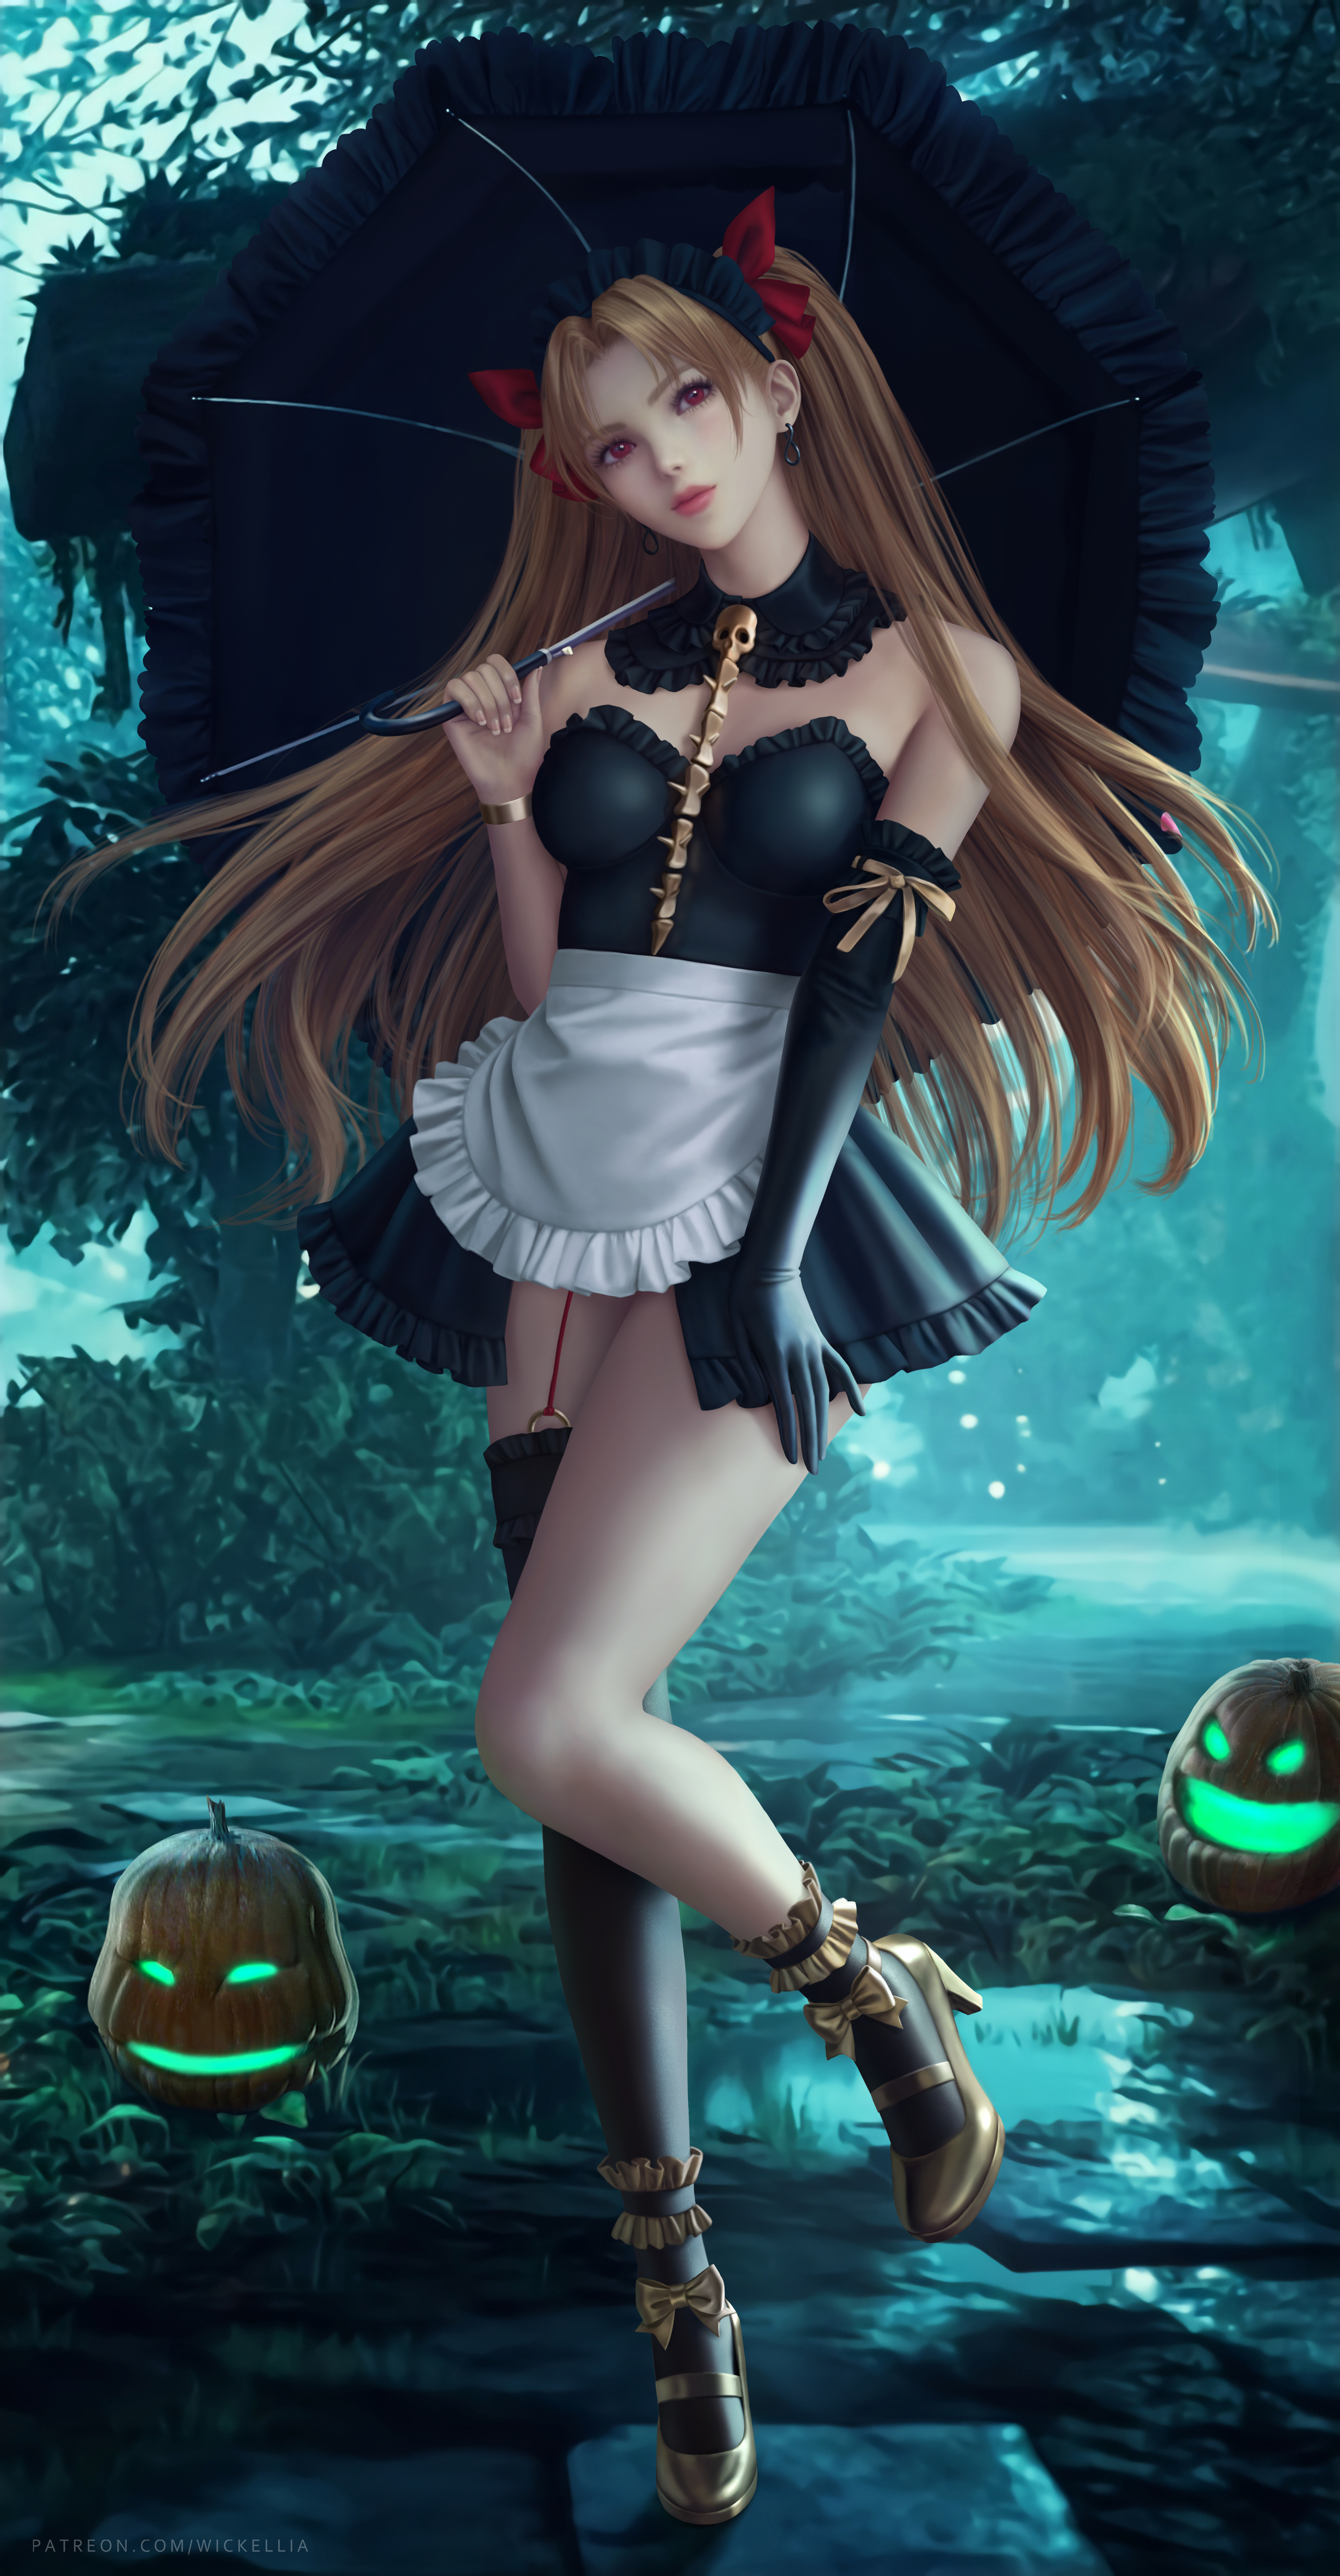 Ereshkigal Fate Grand Order Fate Grand Order Anime Anime Girls Twintails Umbrella Dress Maid Outfit  3900x7500